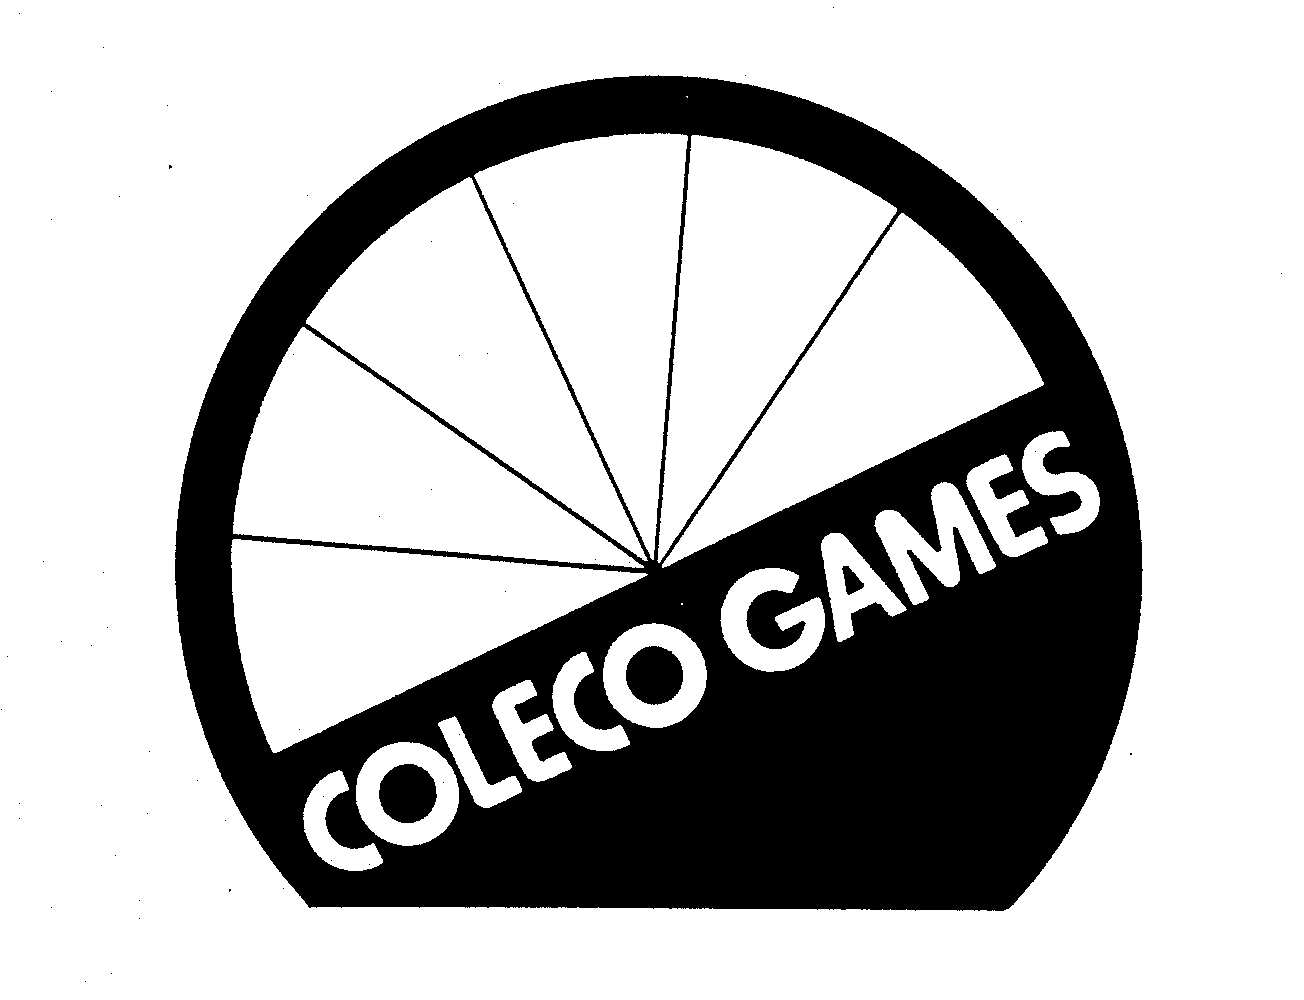 COLECO GAMES